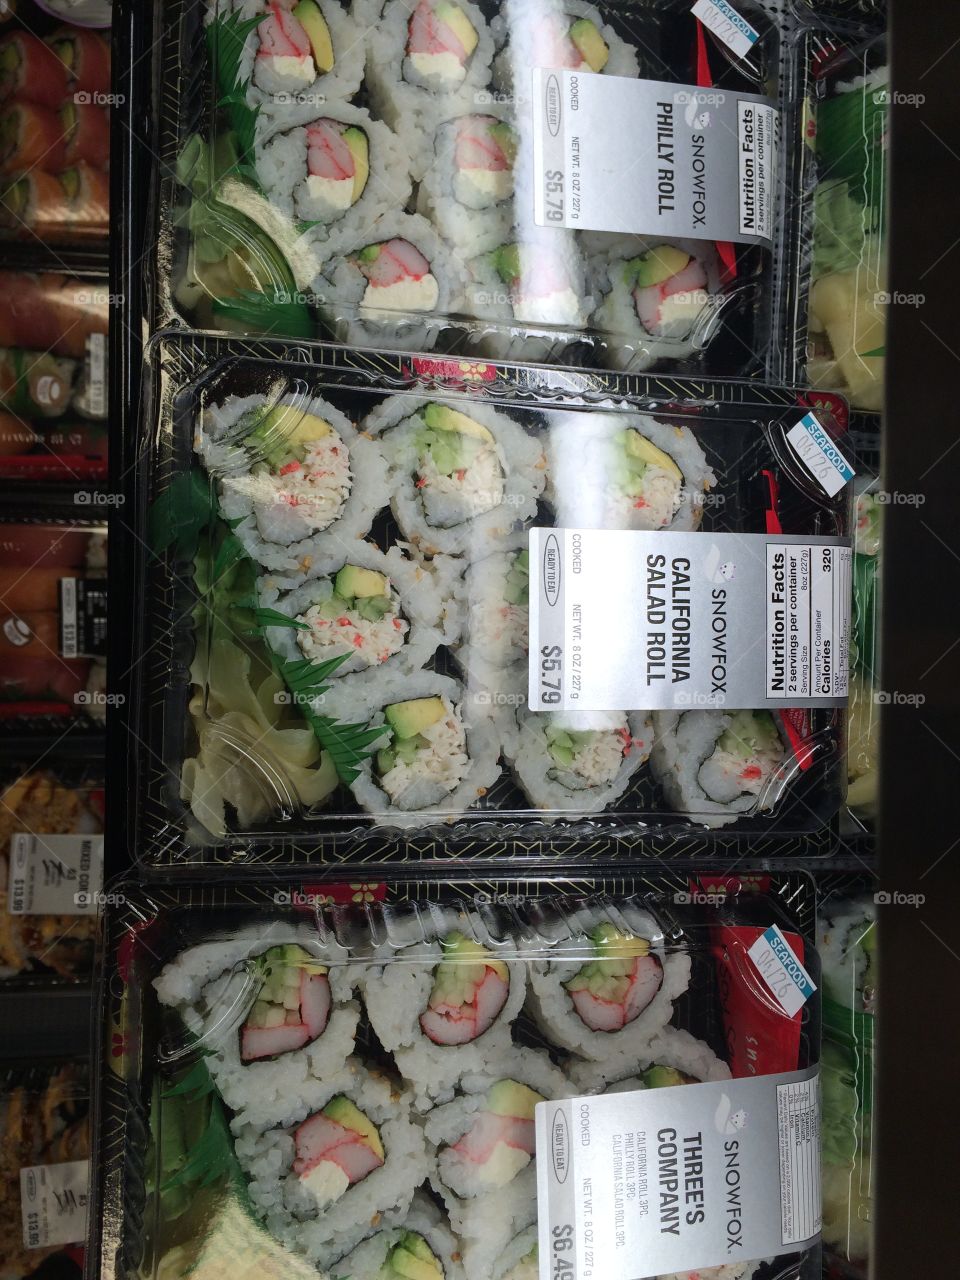 Grocery Store Sushi -2
